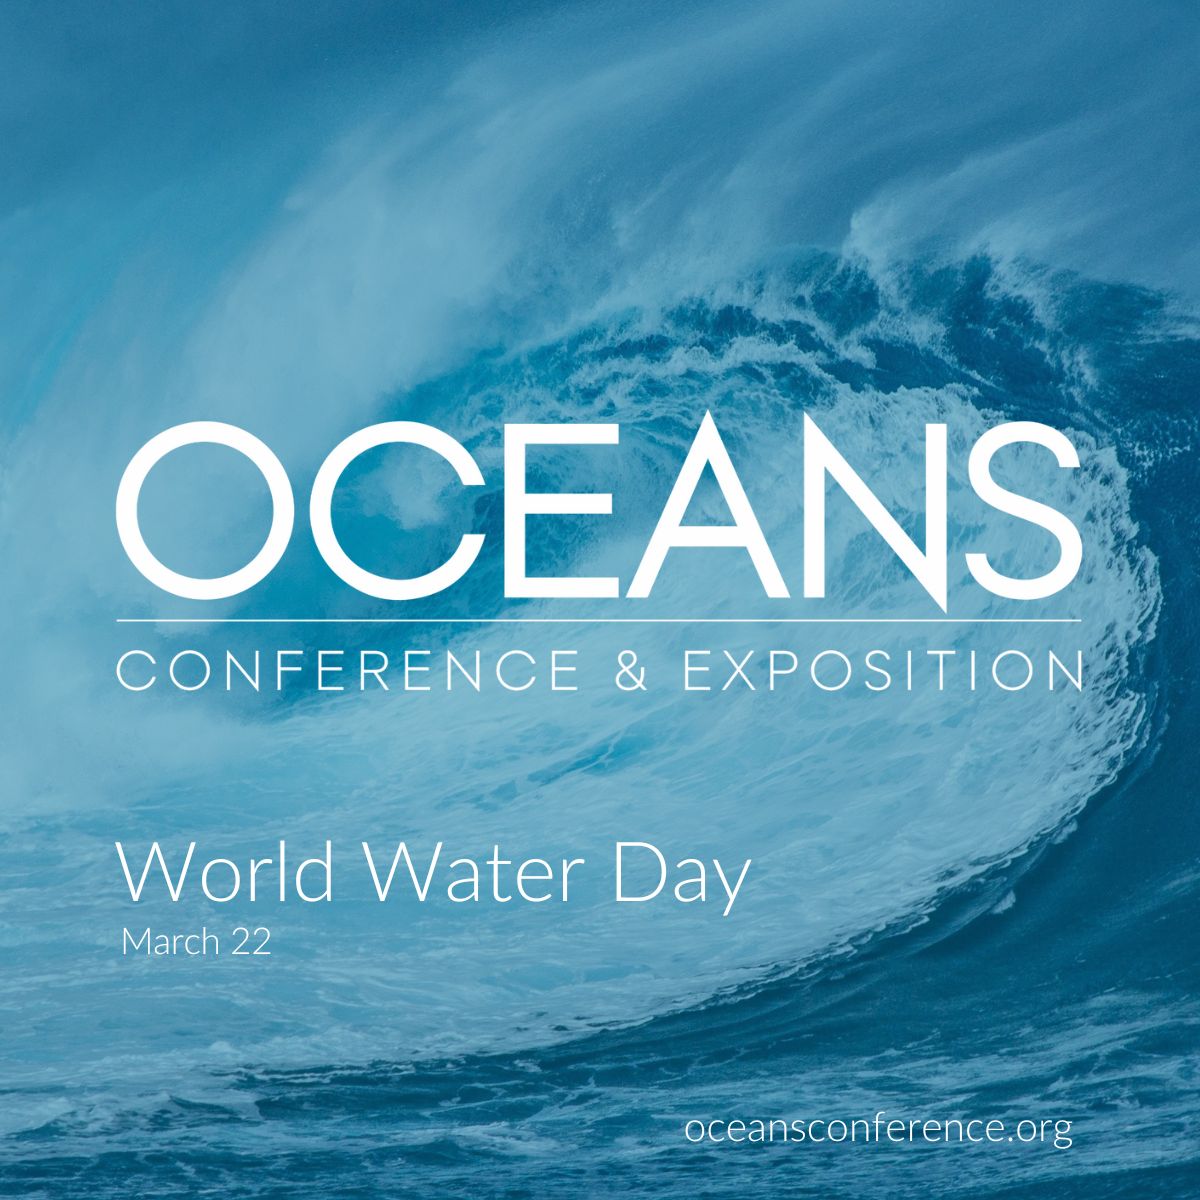 Happy World Water Day from OCEANS Conference & Exposition! 💧 As leading innovators, analysts, and producers of marine technology, research, and education, let's continue to learn, innovate, and lead in the protection and utilization of our OCEANS! Oceansconference.org